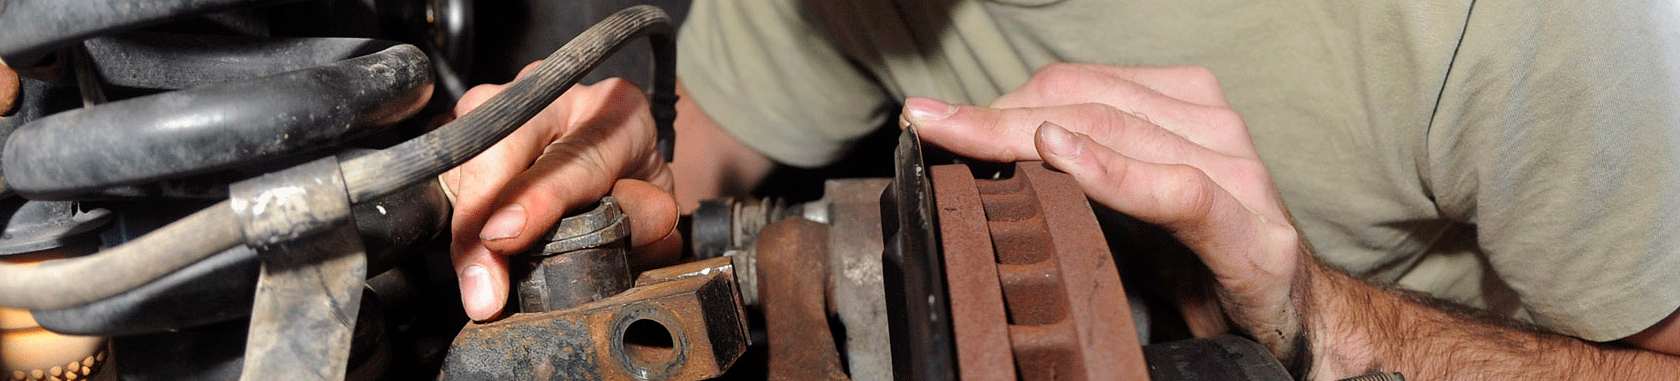 Hands working on automobile suspension